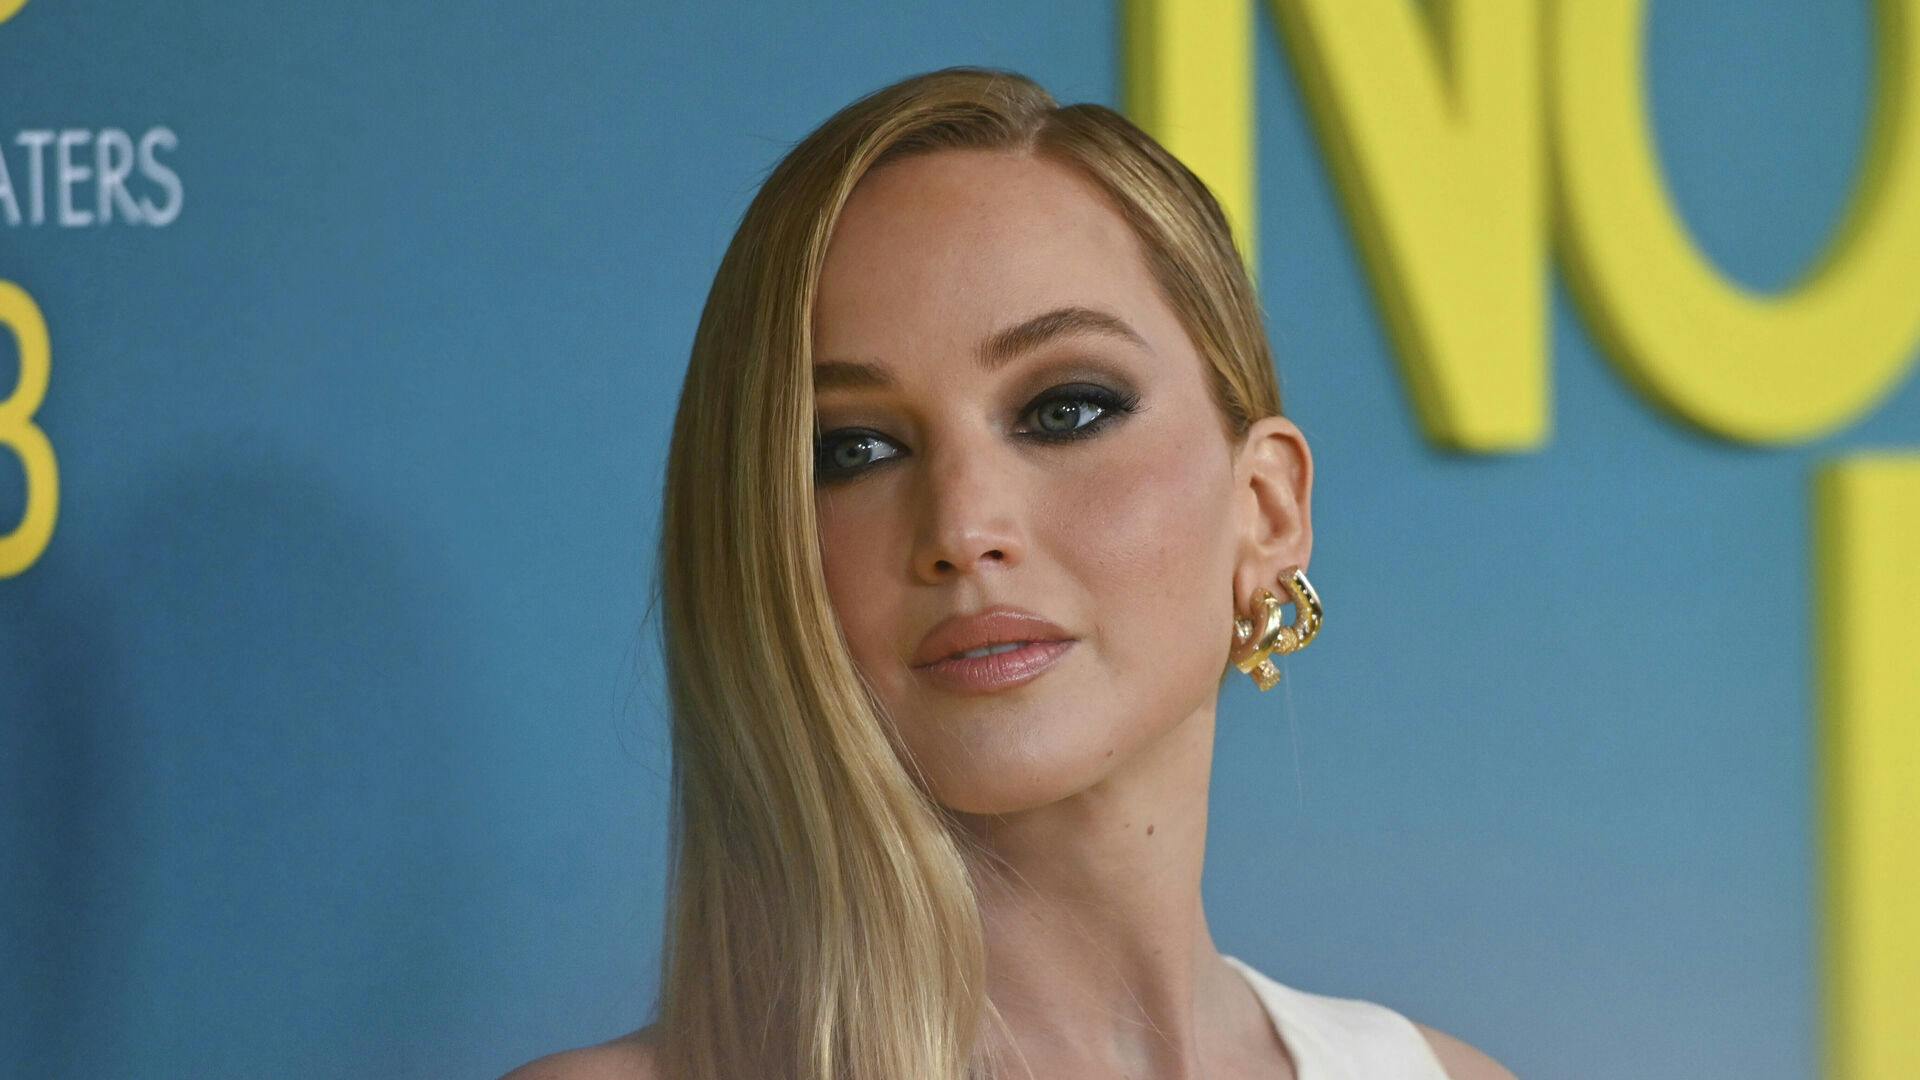 Photo by: NDZ/STAR MAX/IPx 2023 6/20/23 Jennifer Lawrence at the premiere of 'No Hard Feelings' at AMC Lincoln Square Theater on June 20, 2023 in New York City.